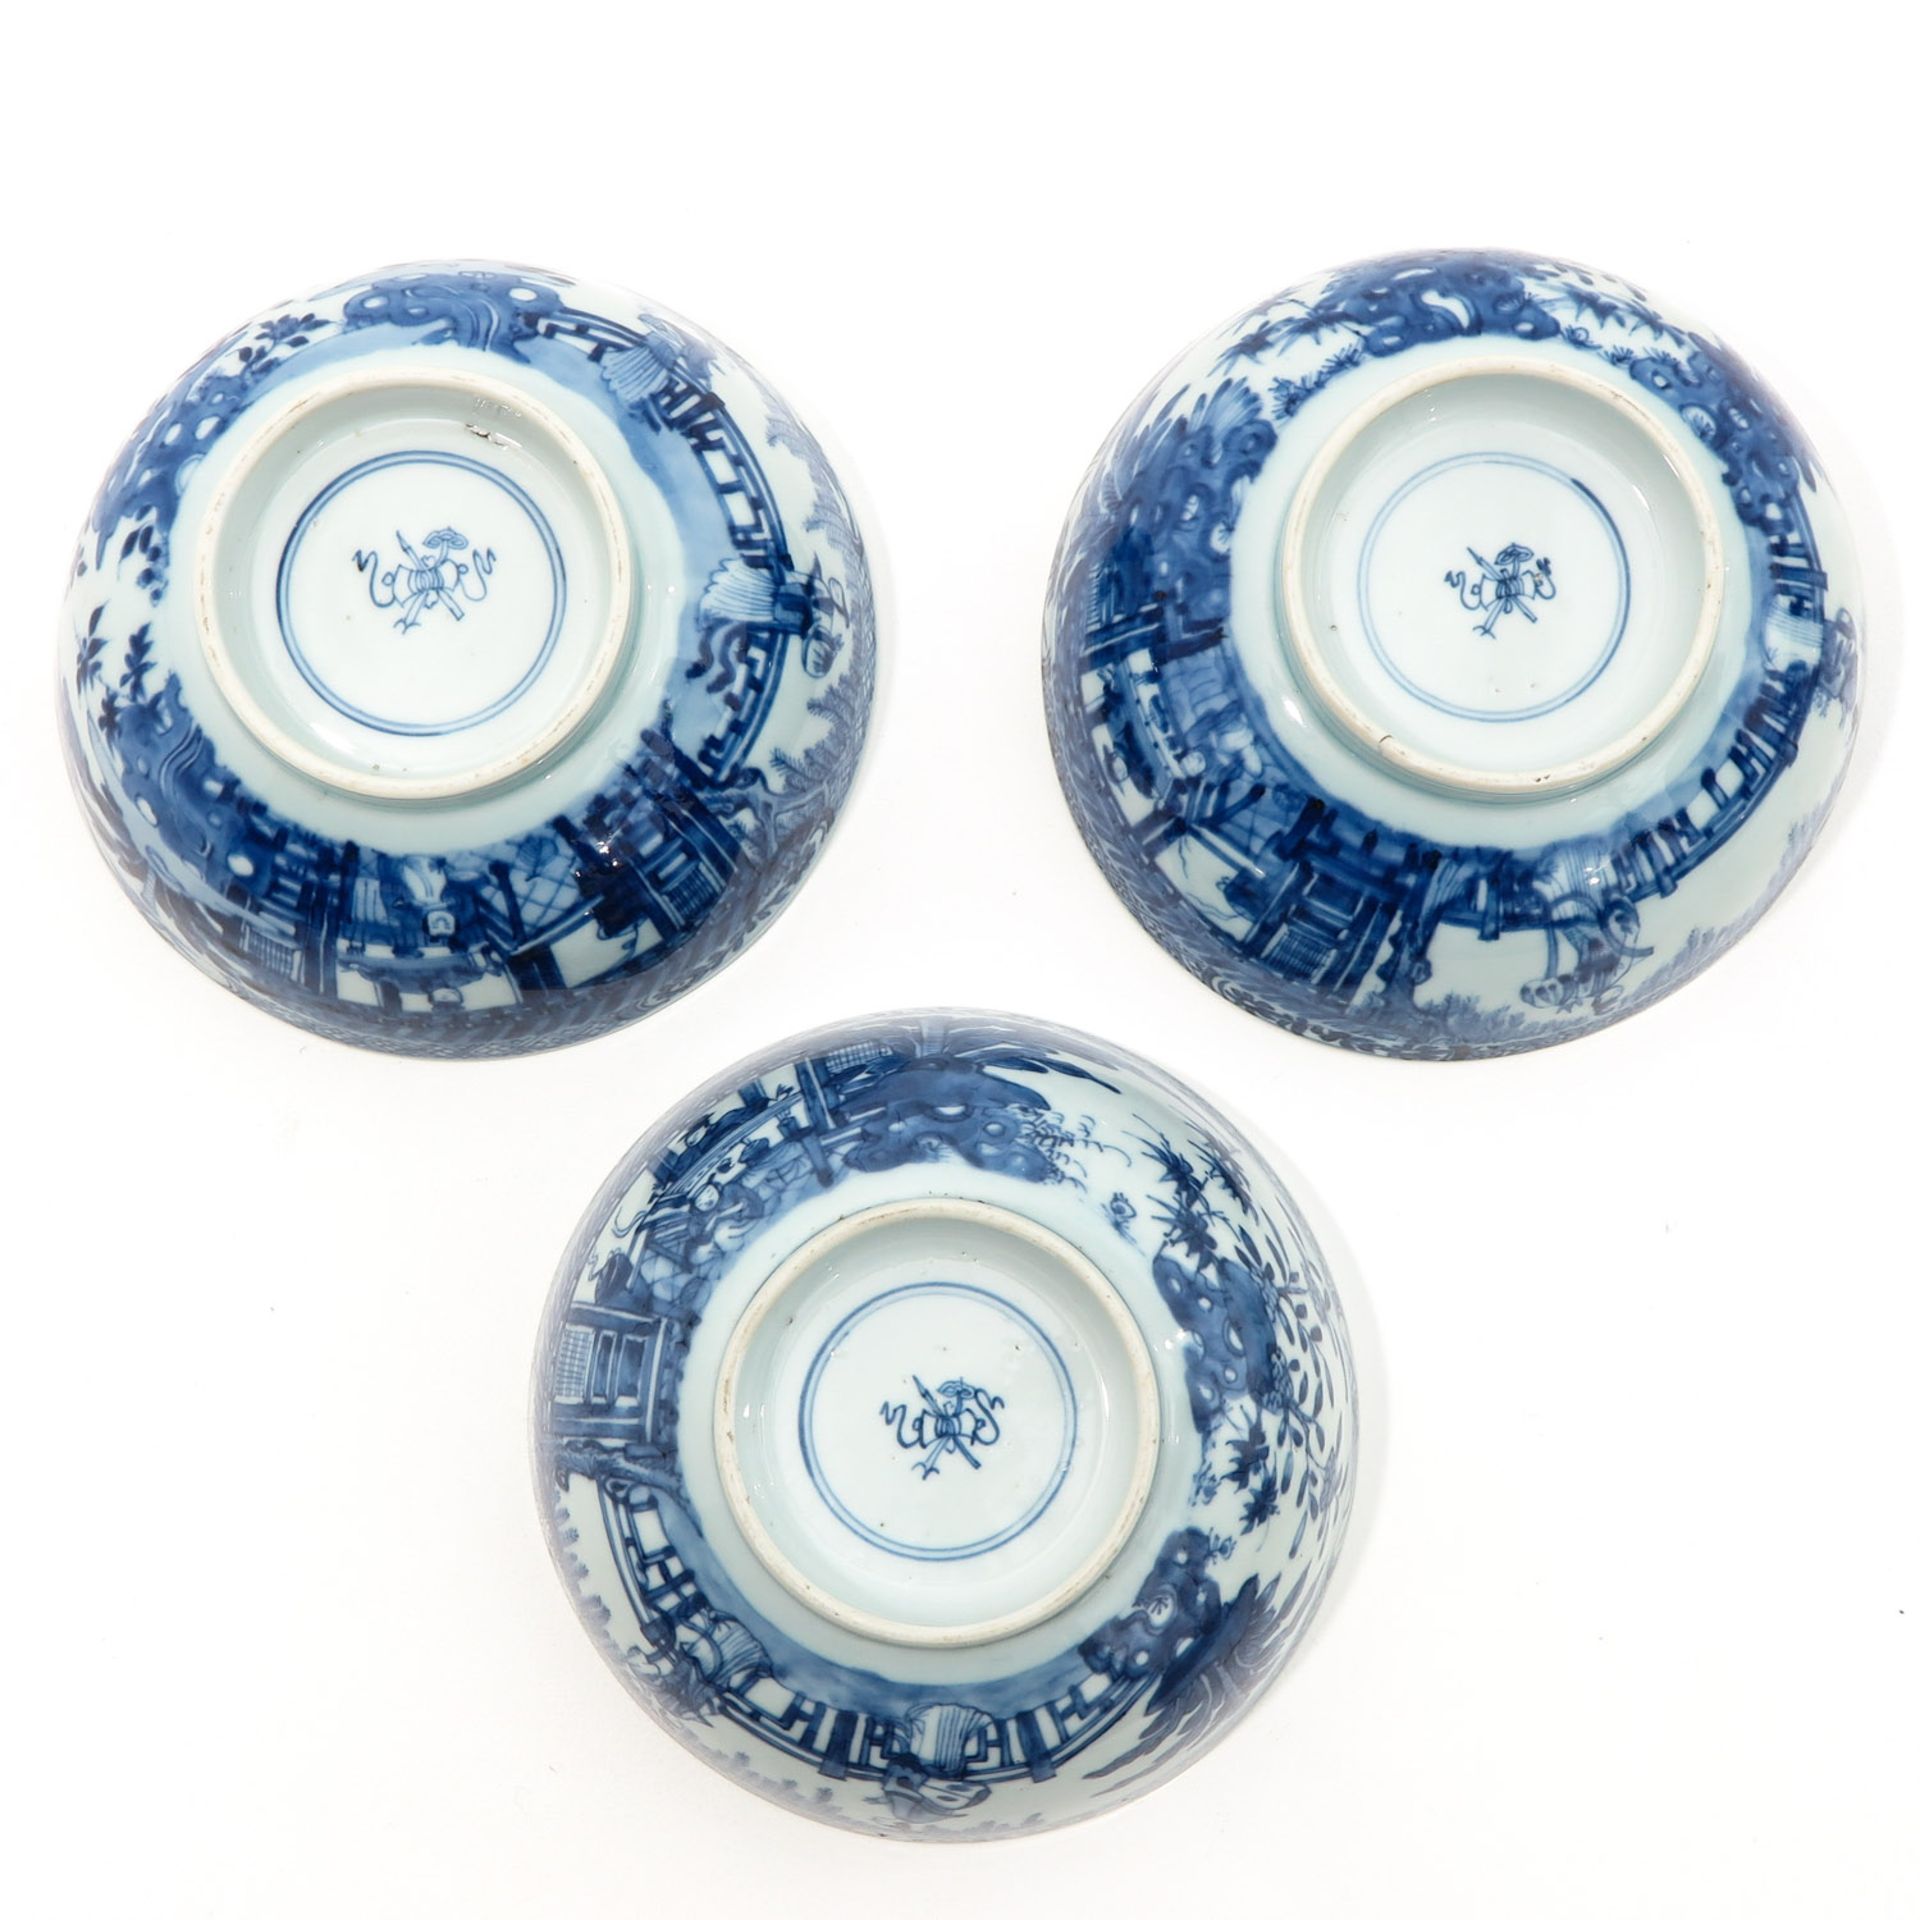 A Series of 3 Blue and White Bowls - Image 6 of 10